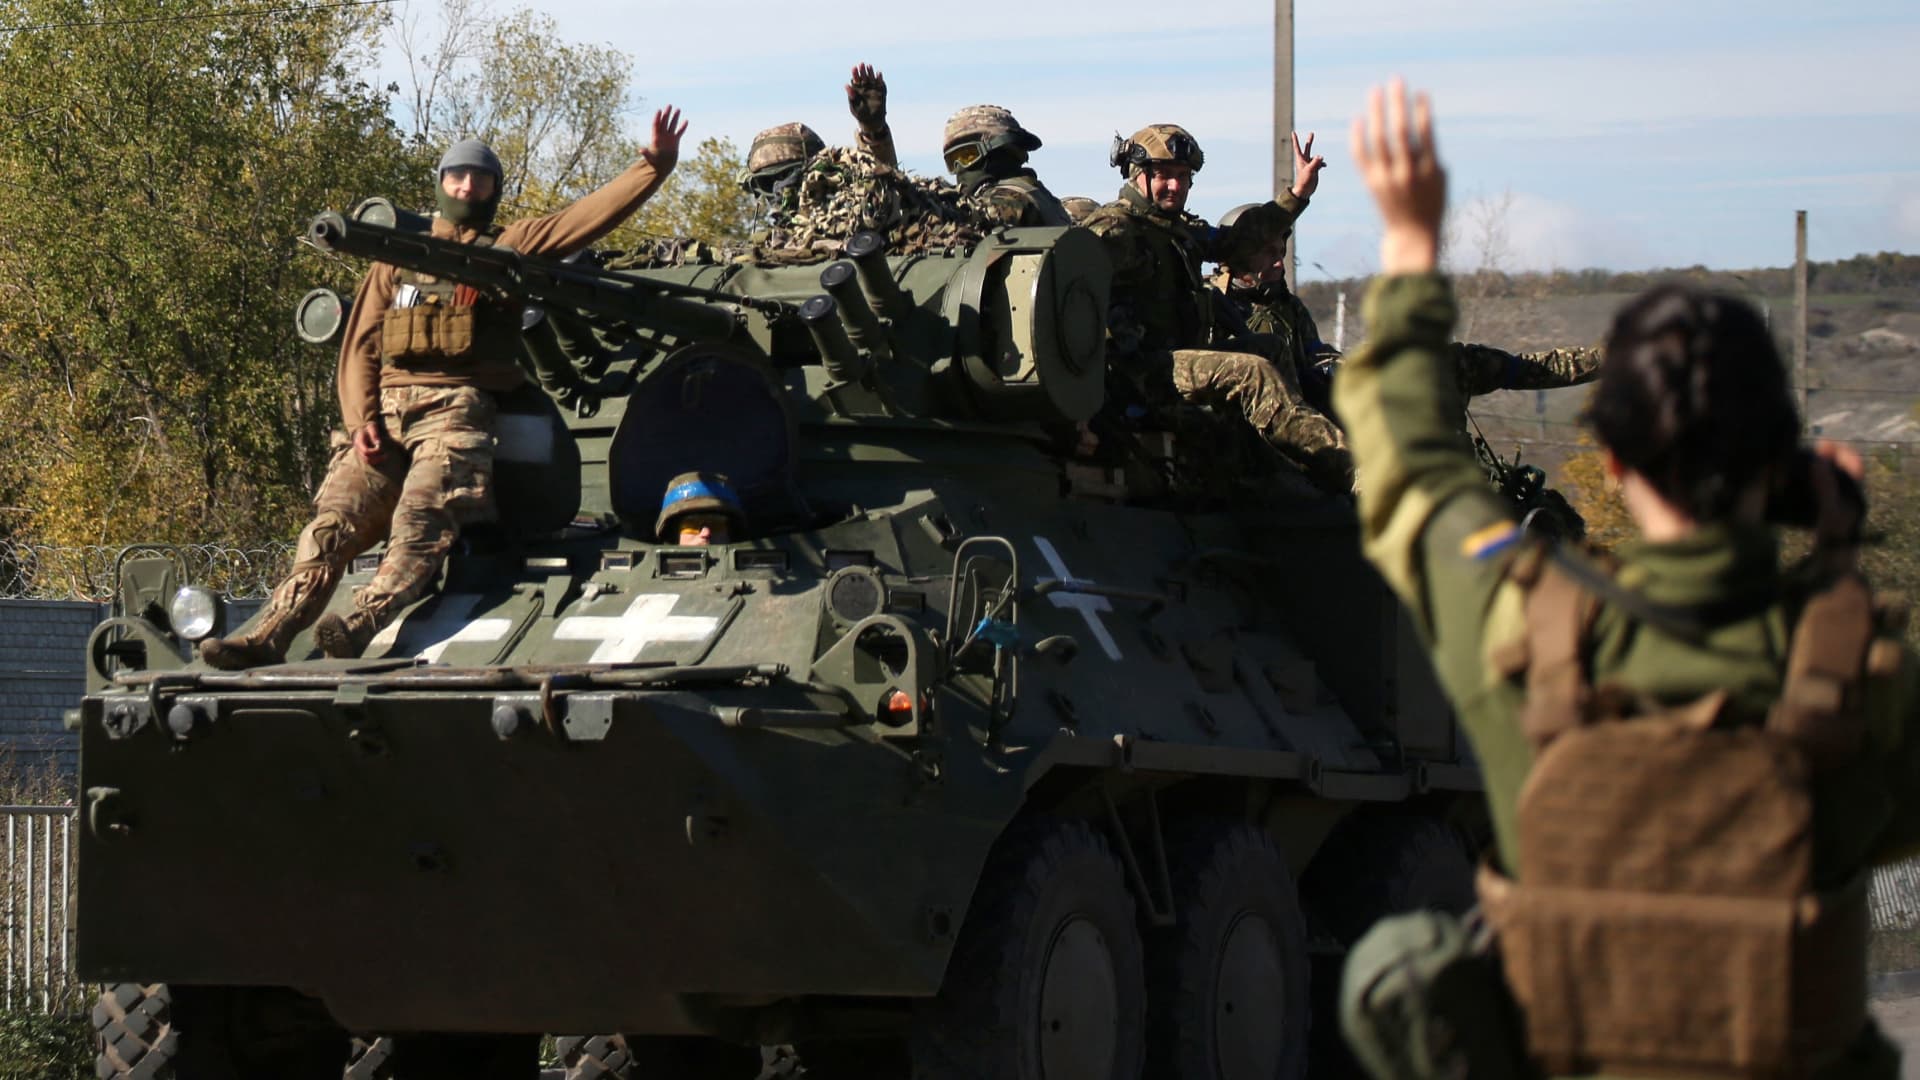 Ukrainian soldiers on a personnel armored carrier on a road in the Donetsk region on Oct. 5, 2022, amid the Russian invasion of Ukraine.